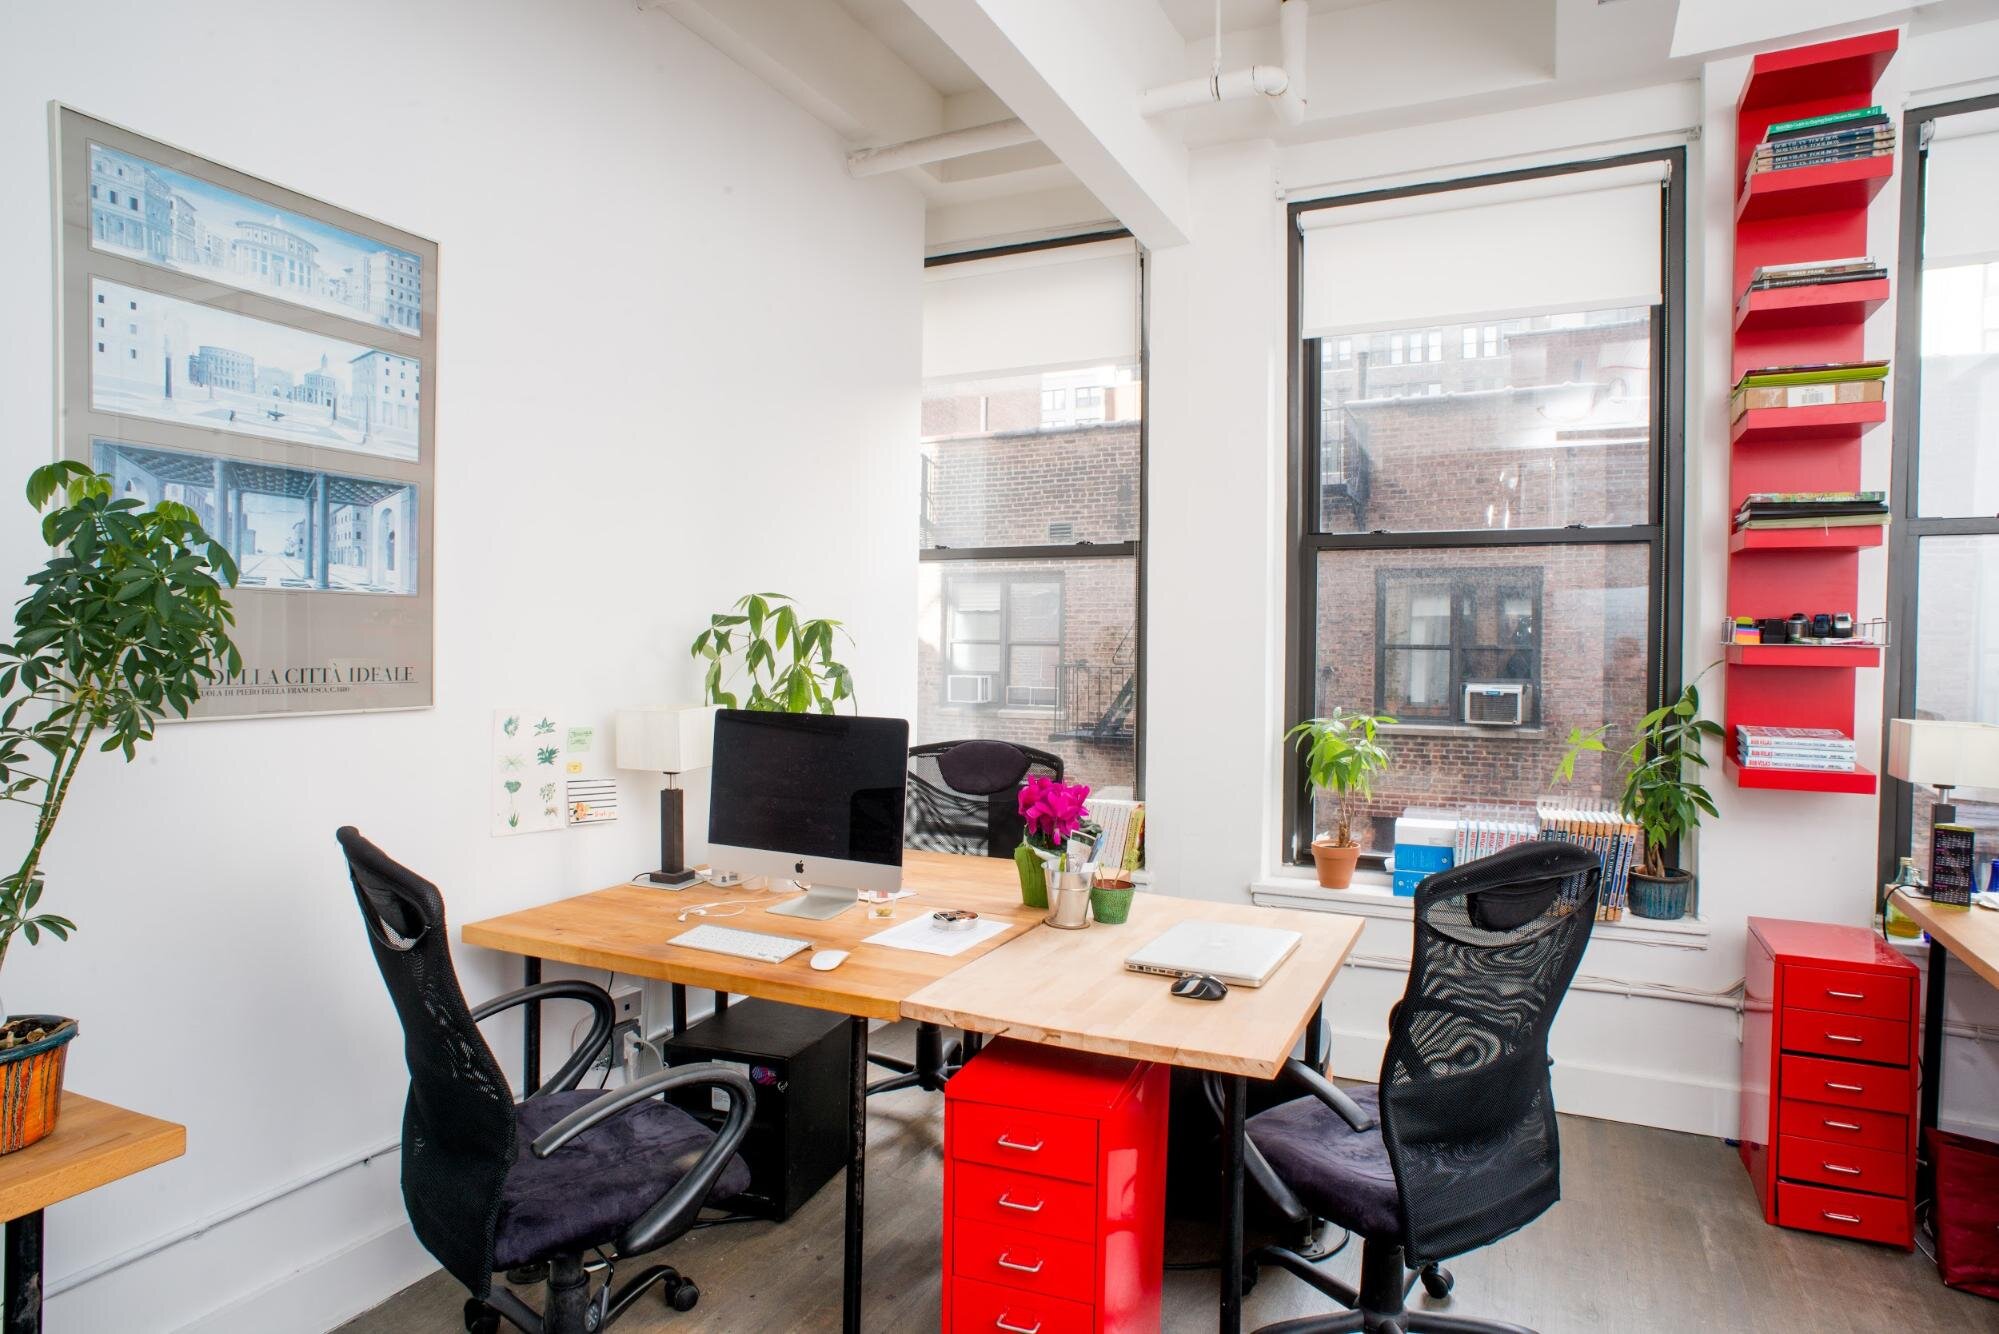 Inside a small office with a shared desk